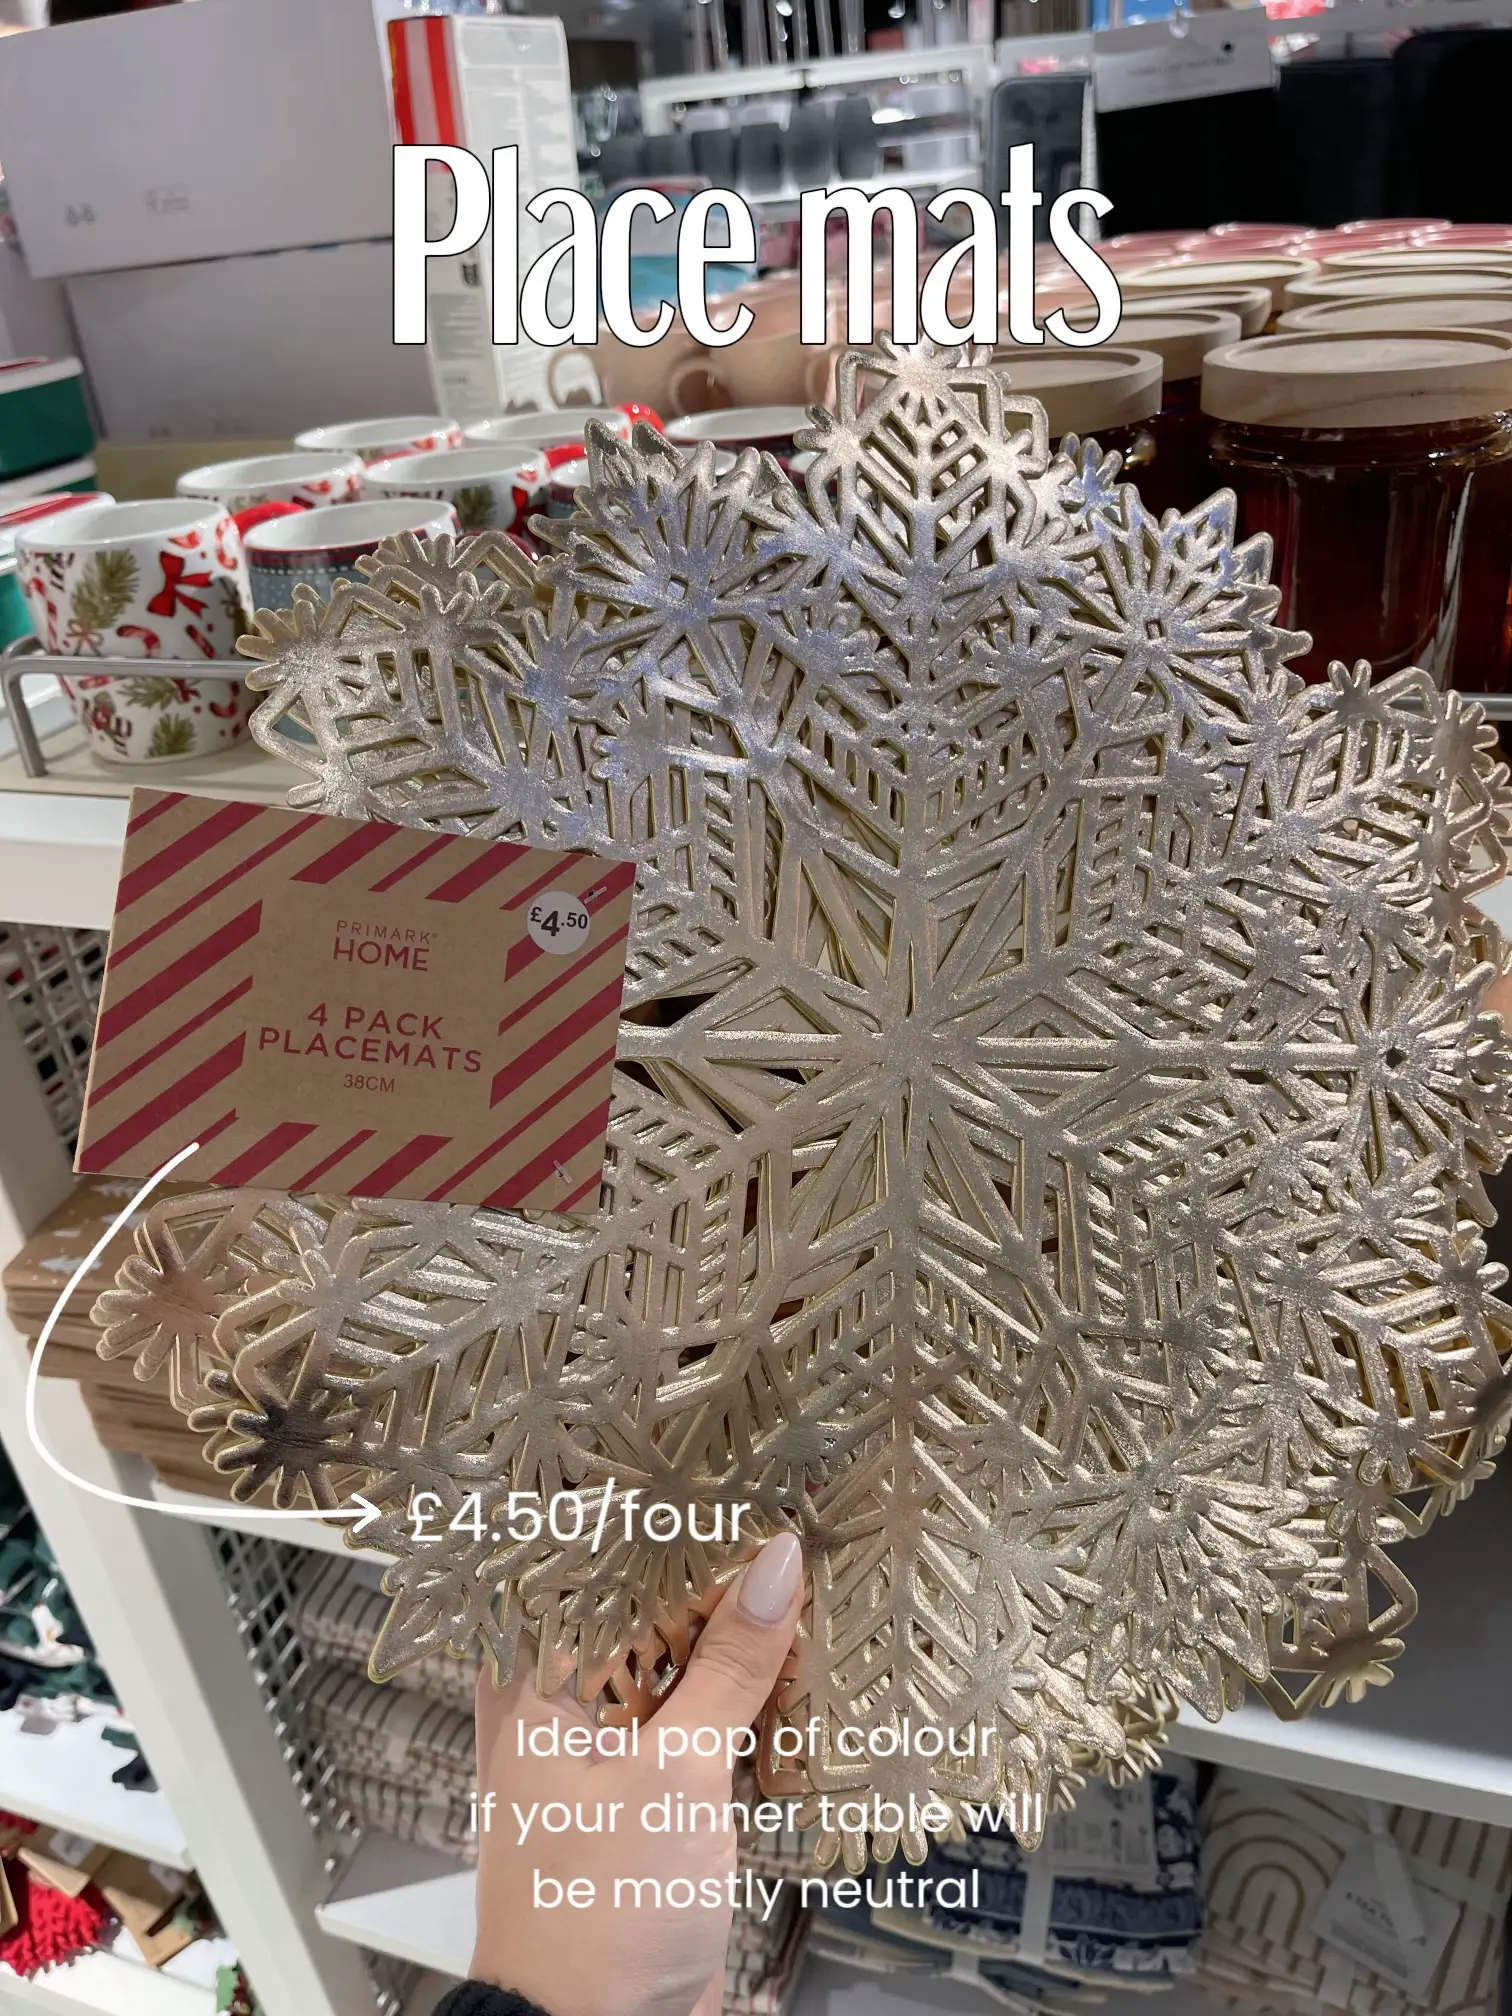 New in Primark: Xmas finds 🎄, Gallery posted by Diana